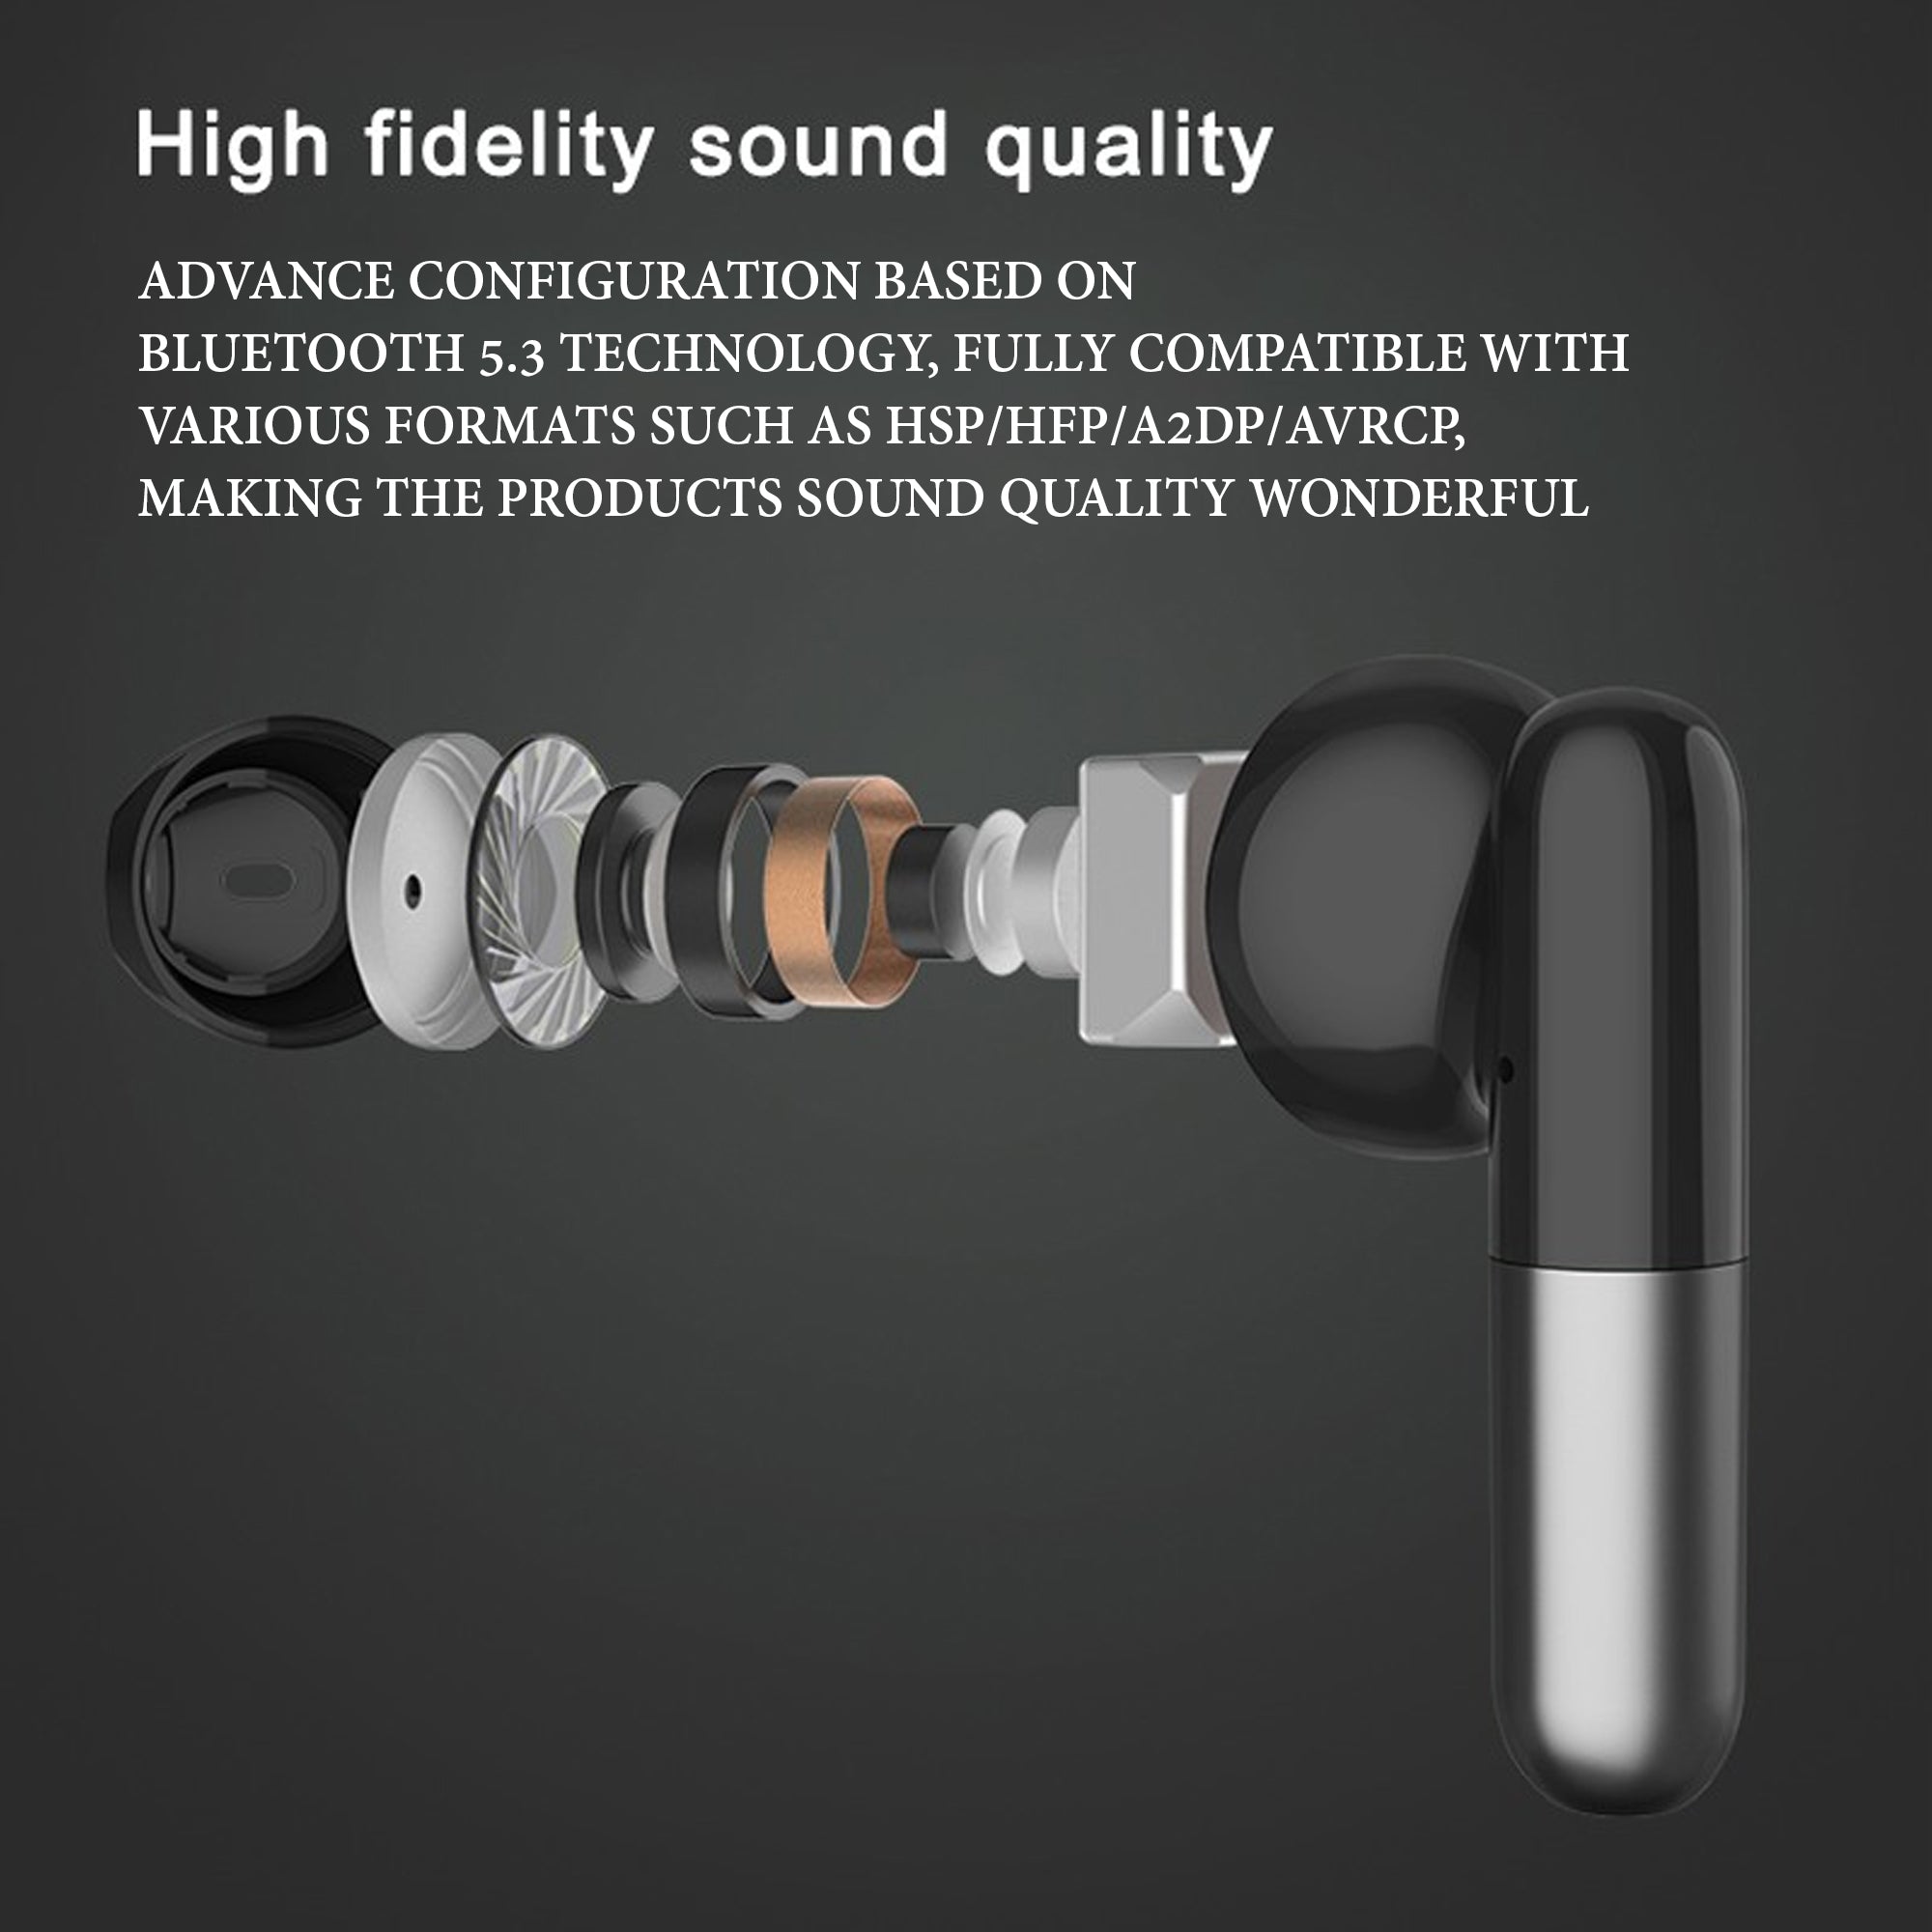 High fidelity features of black and grey earbuds